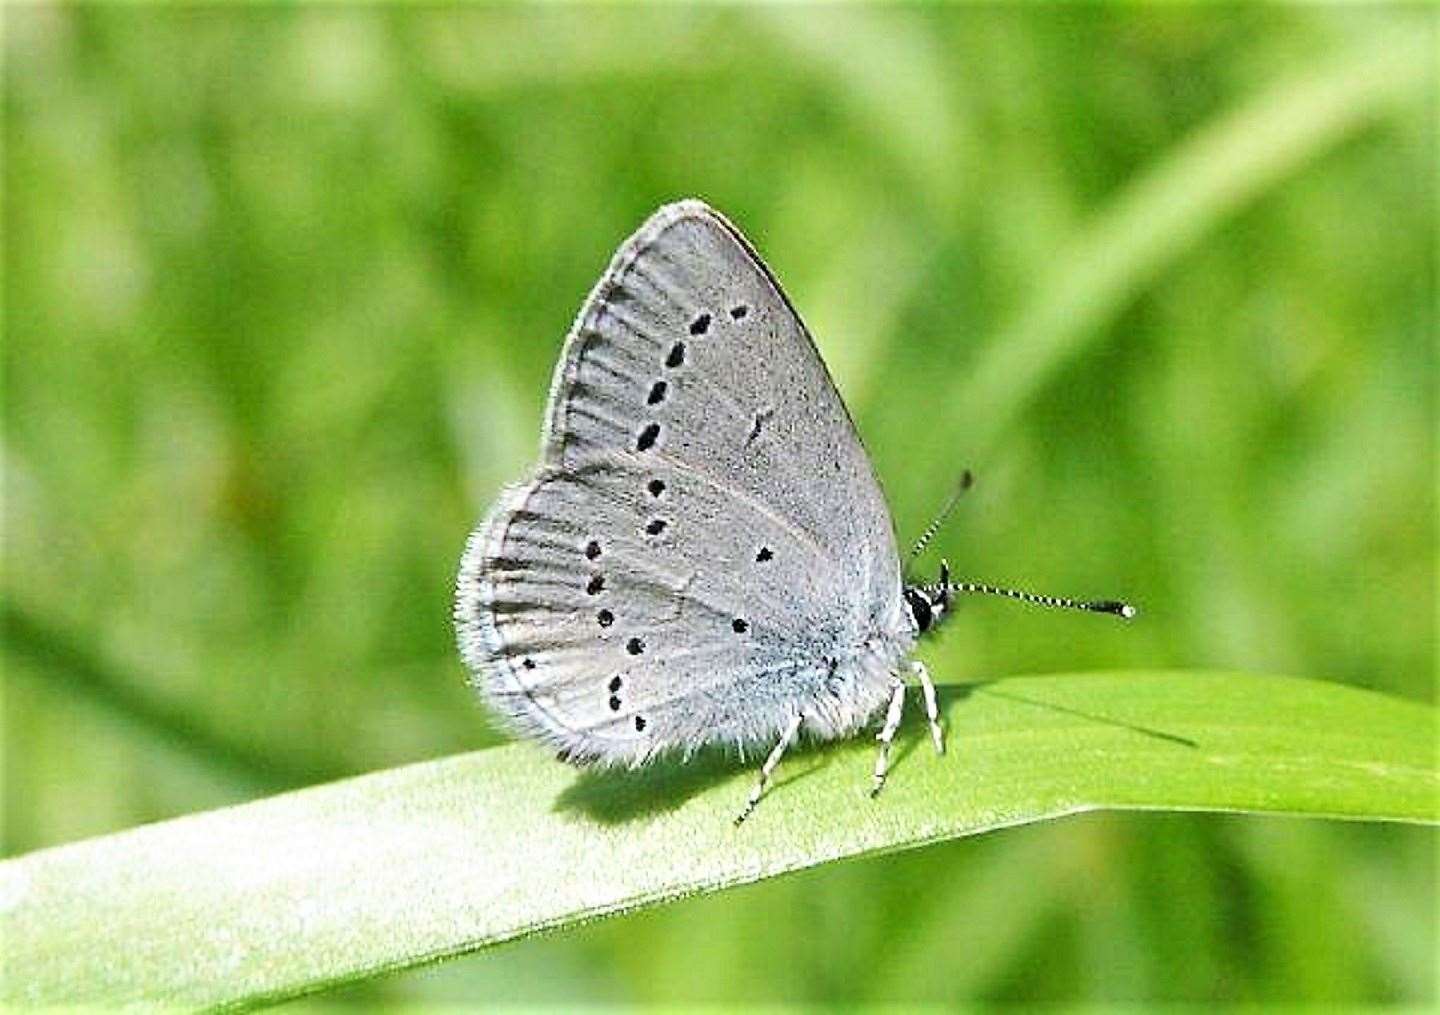 The small blue butterfly is Britian's smallest butterfly and can be found in Caithness. The Caithness Biodiversity Group has been growing and planting out kidney vetch to feed the rare small blue butterfly and help it to thrive.